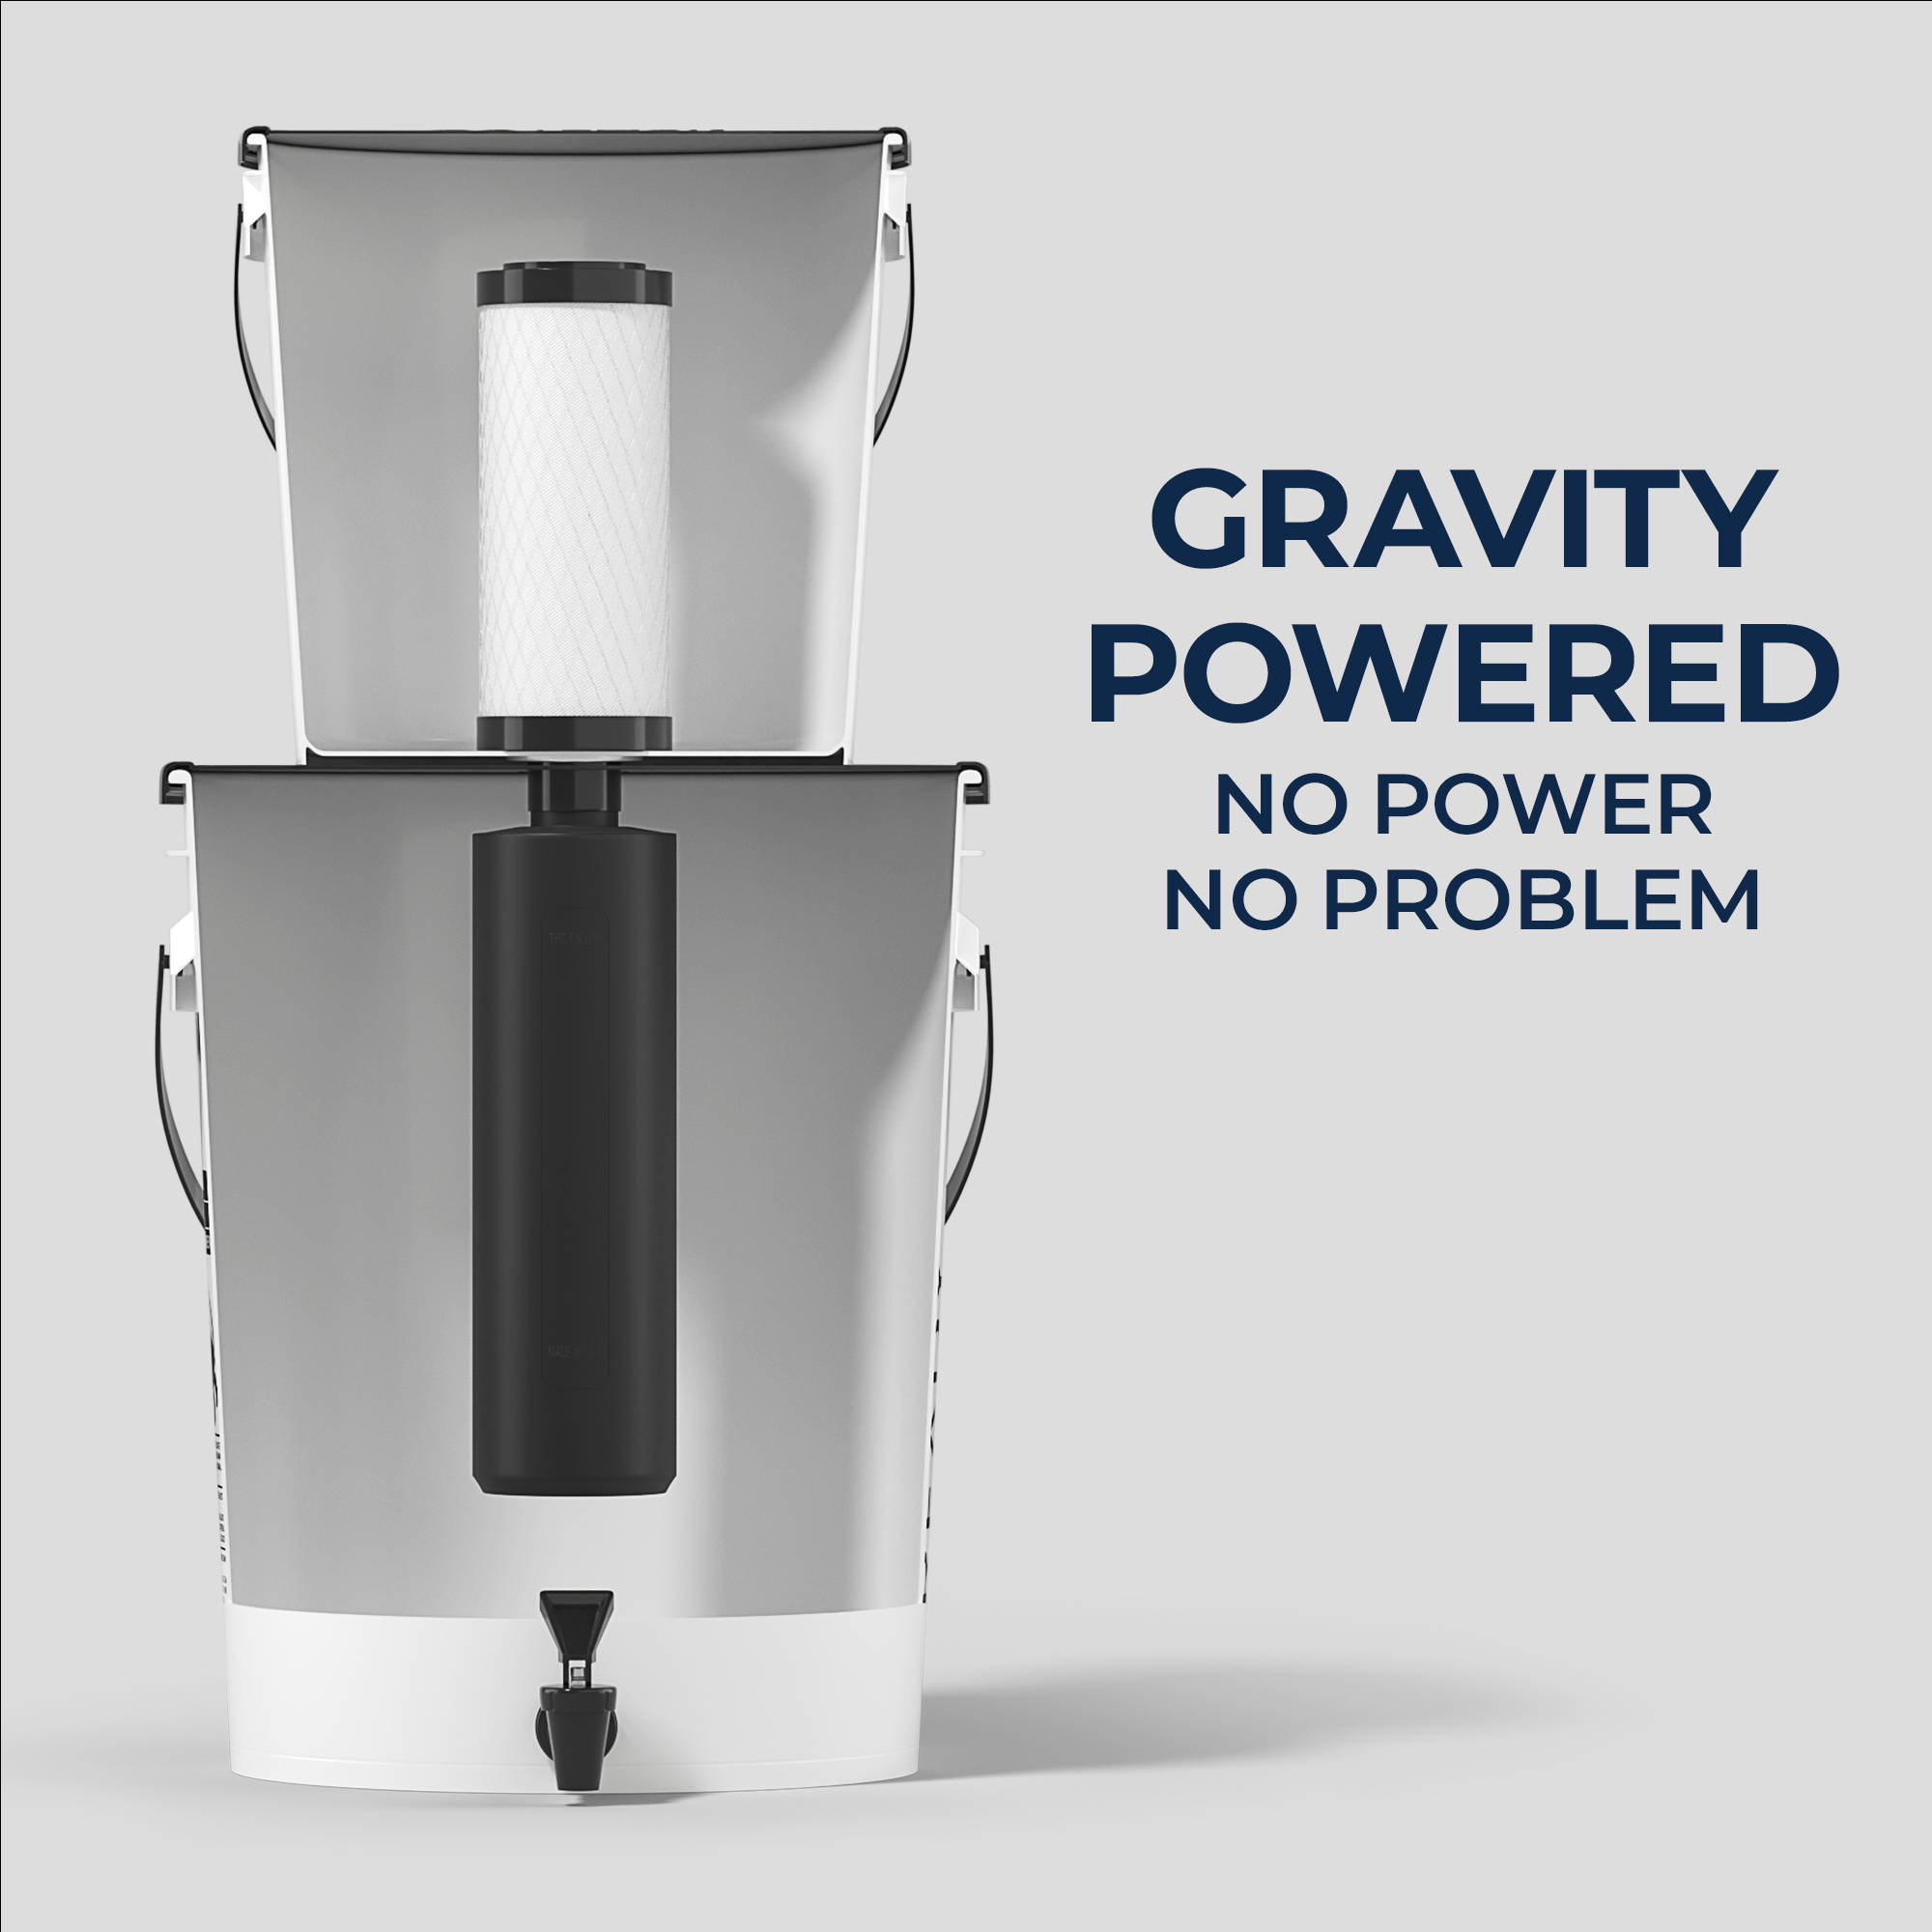 Outback gravity powered powerful water filtration for emergencies